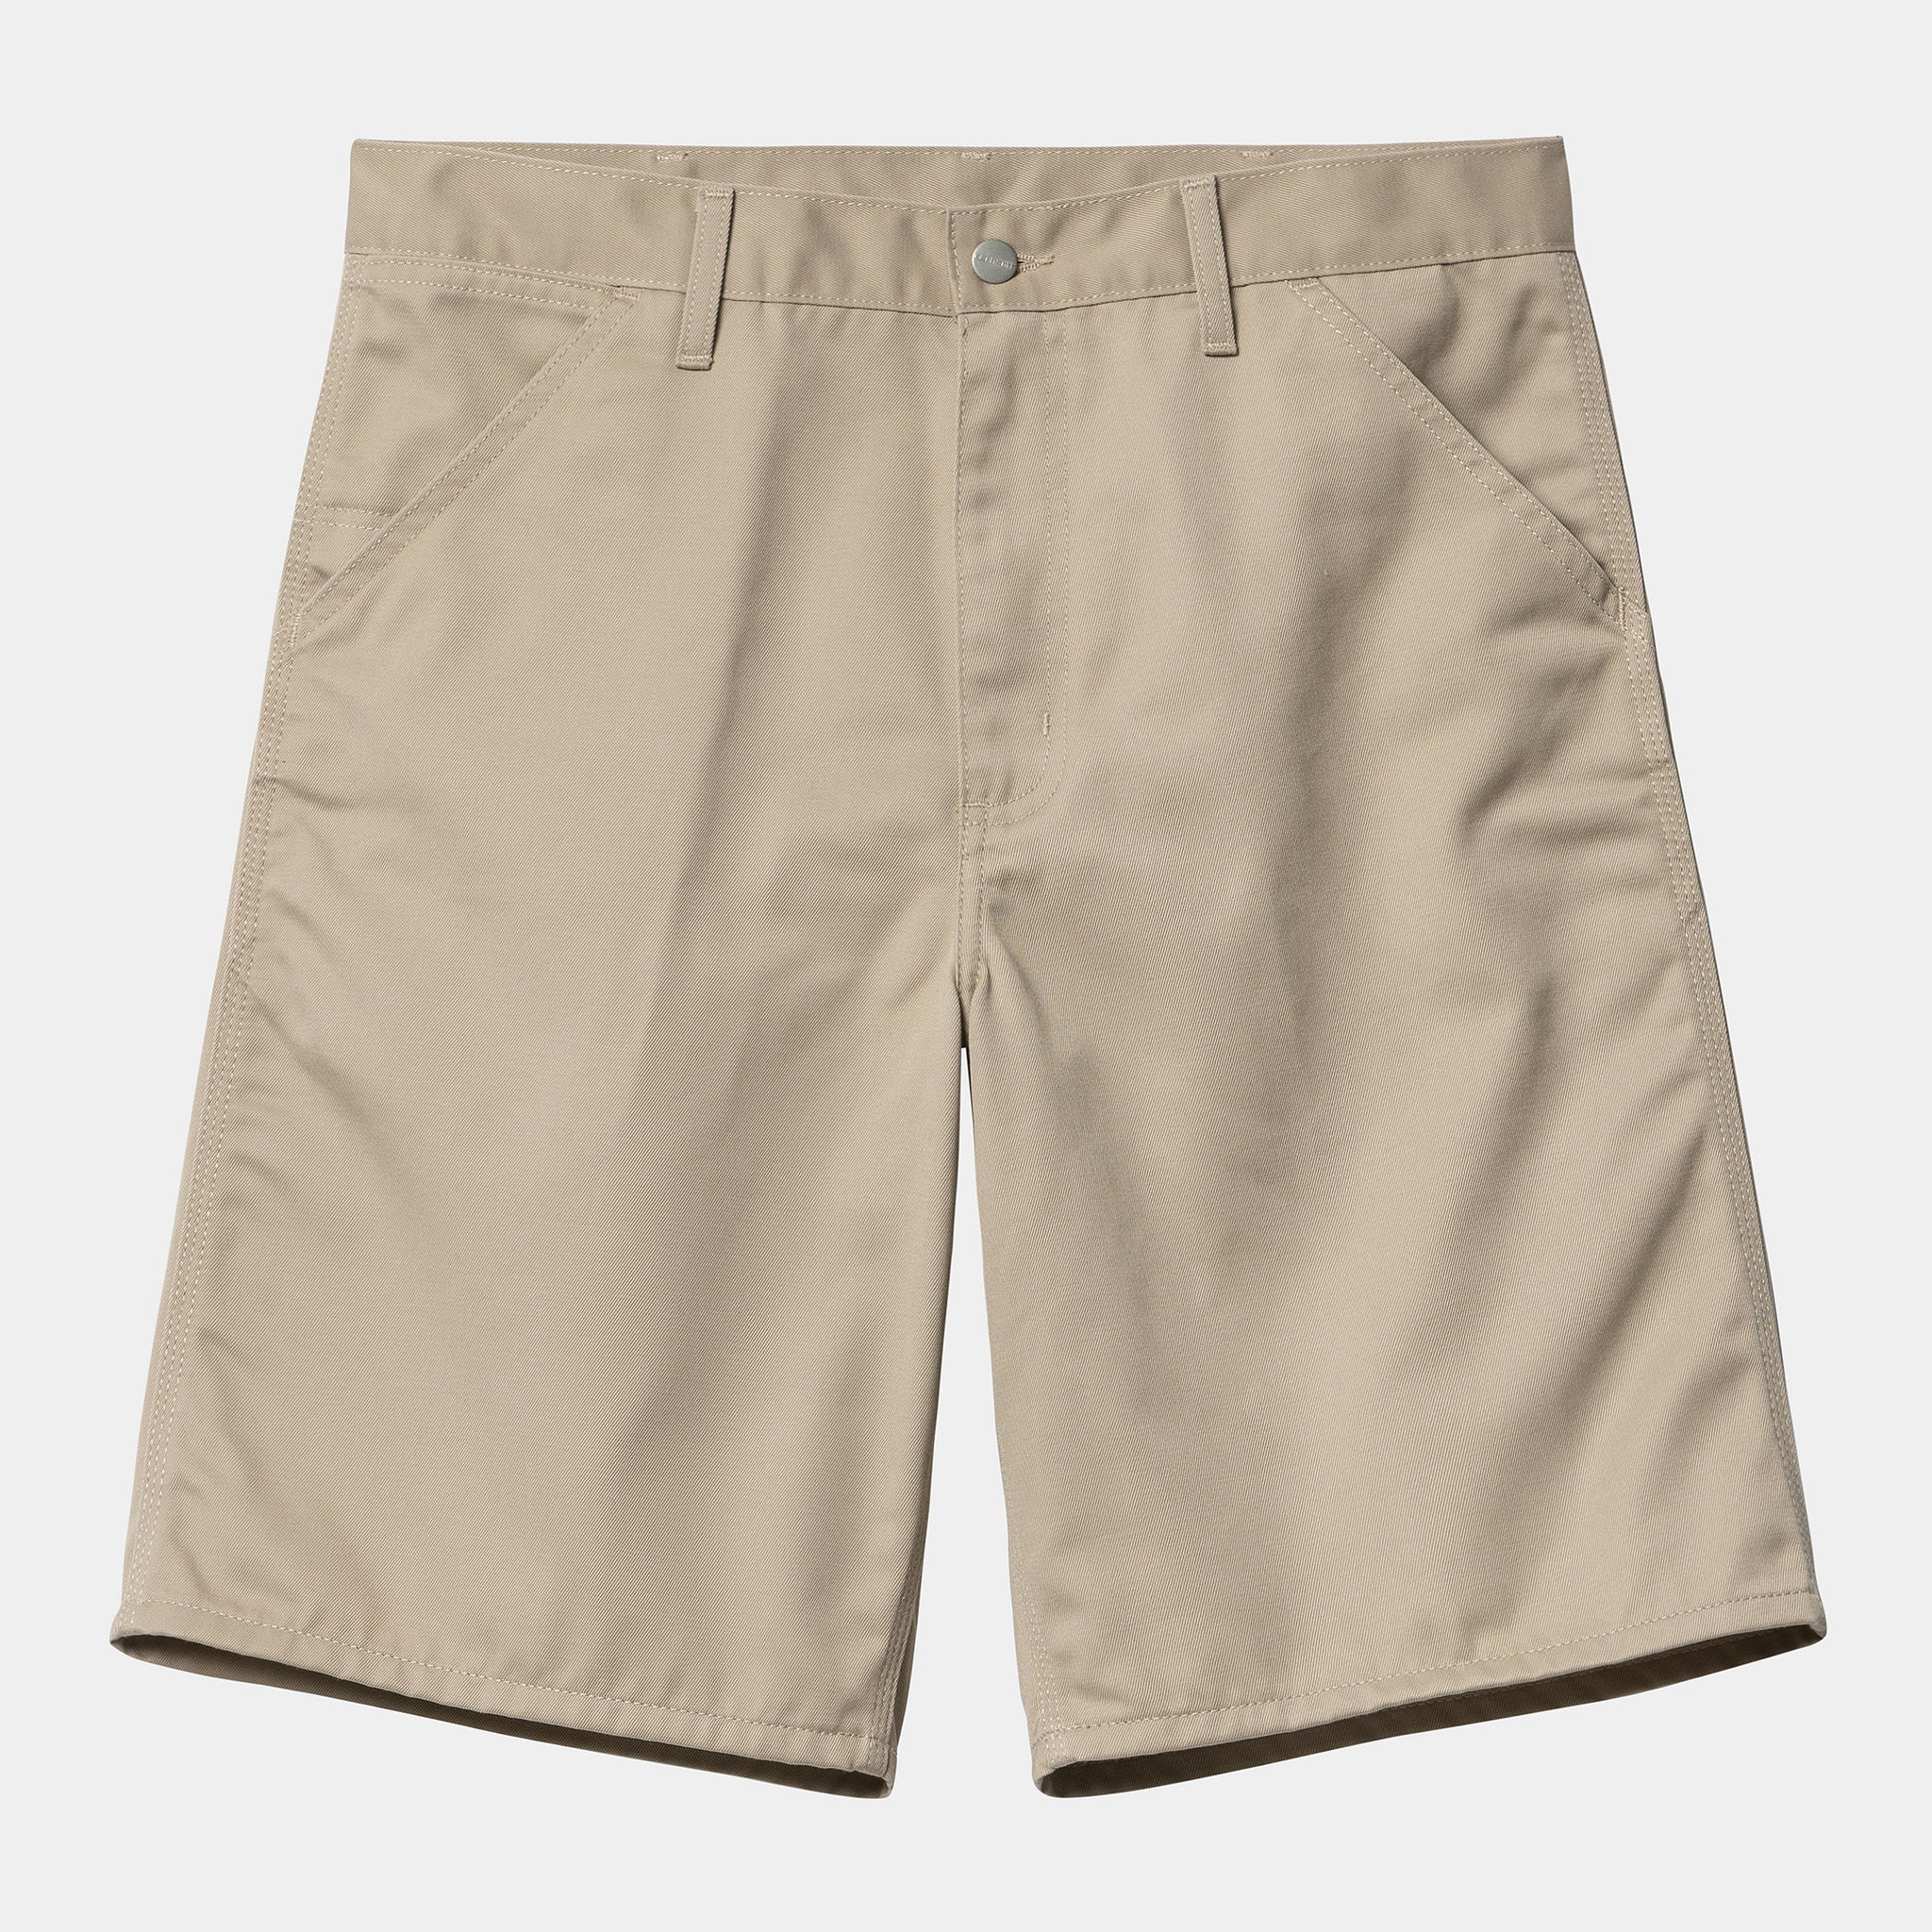 Simple Short Polyester/cotton Denison Twill, 8.8 Oz Wall Rinsed